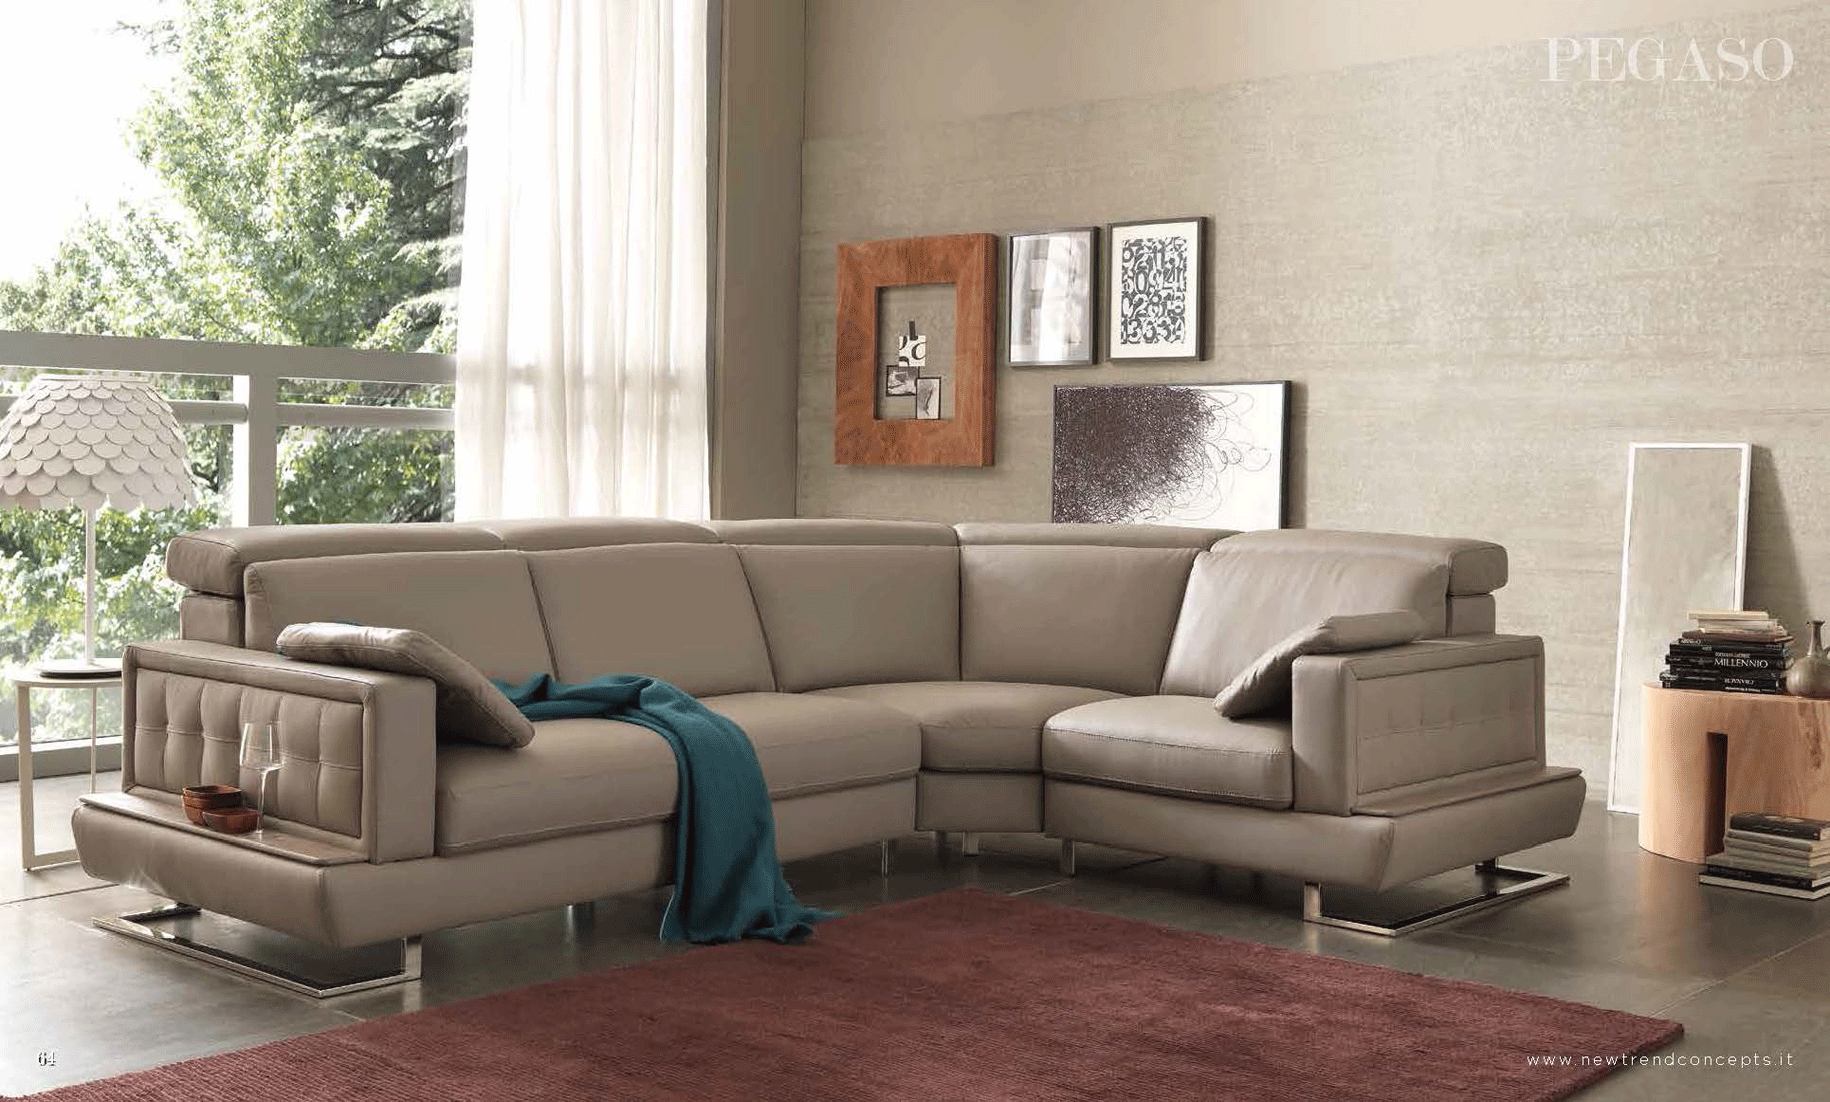 Living Room Furniture Coffee and End Tables Pegaso